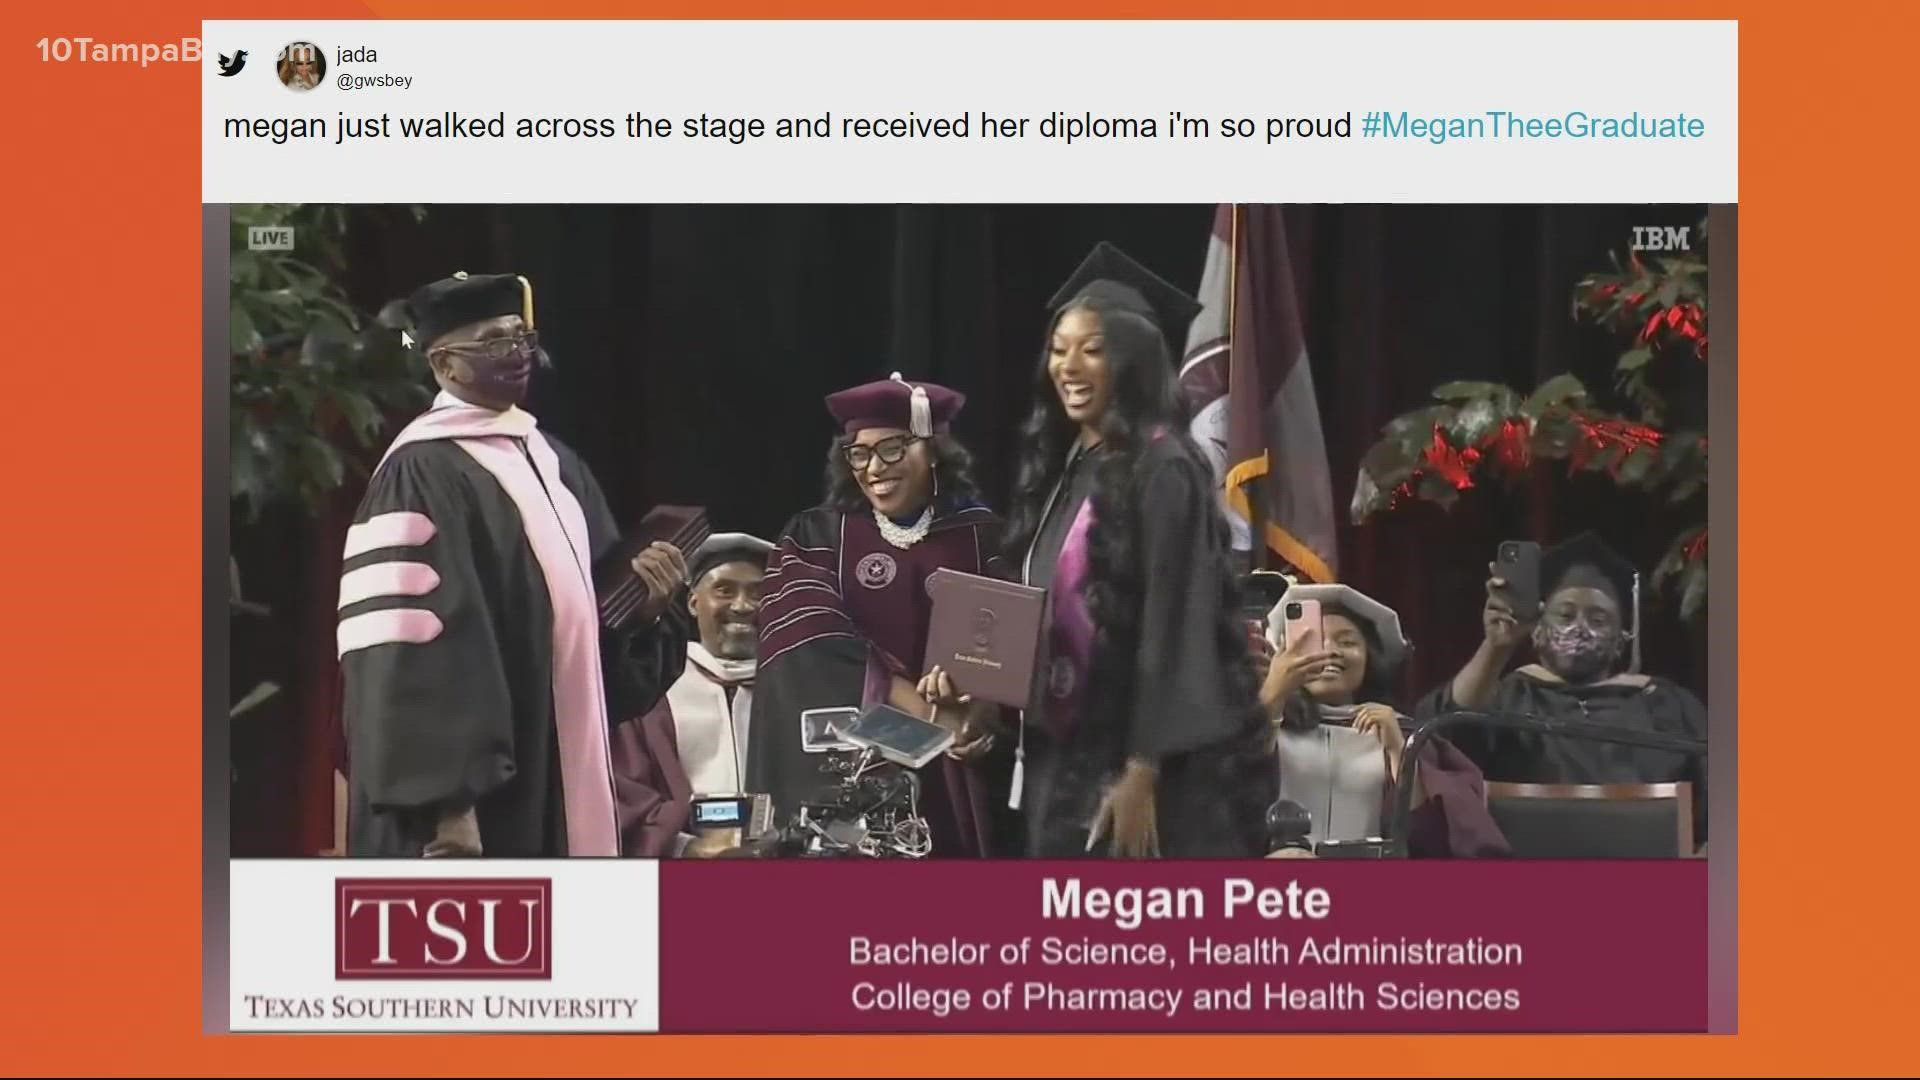 The "Savage" rapper and Houston native received her bachelor's degree in health administration Saturday.